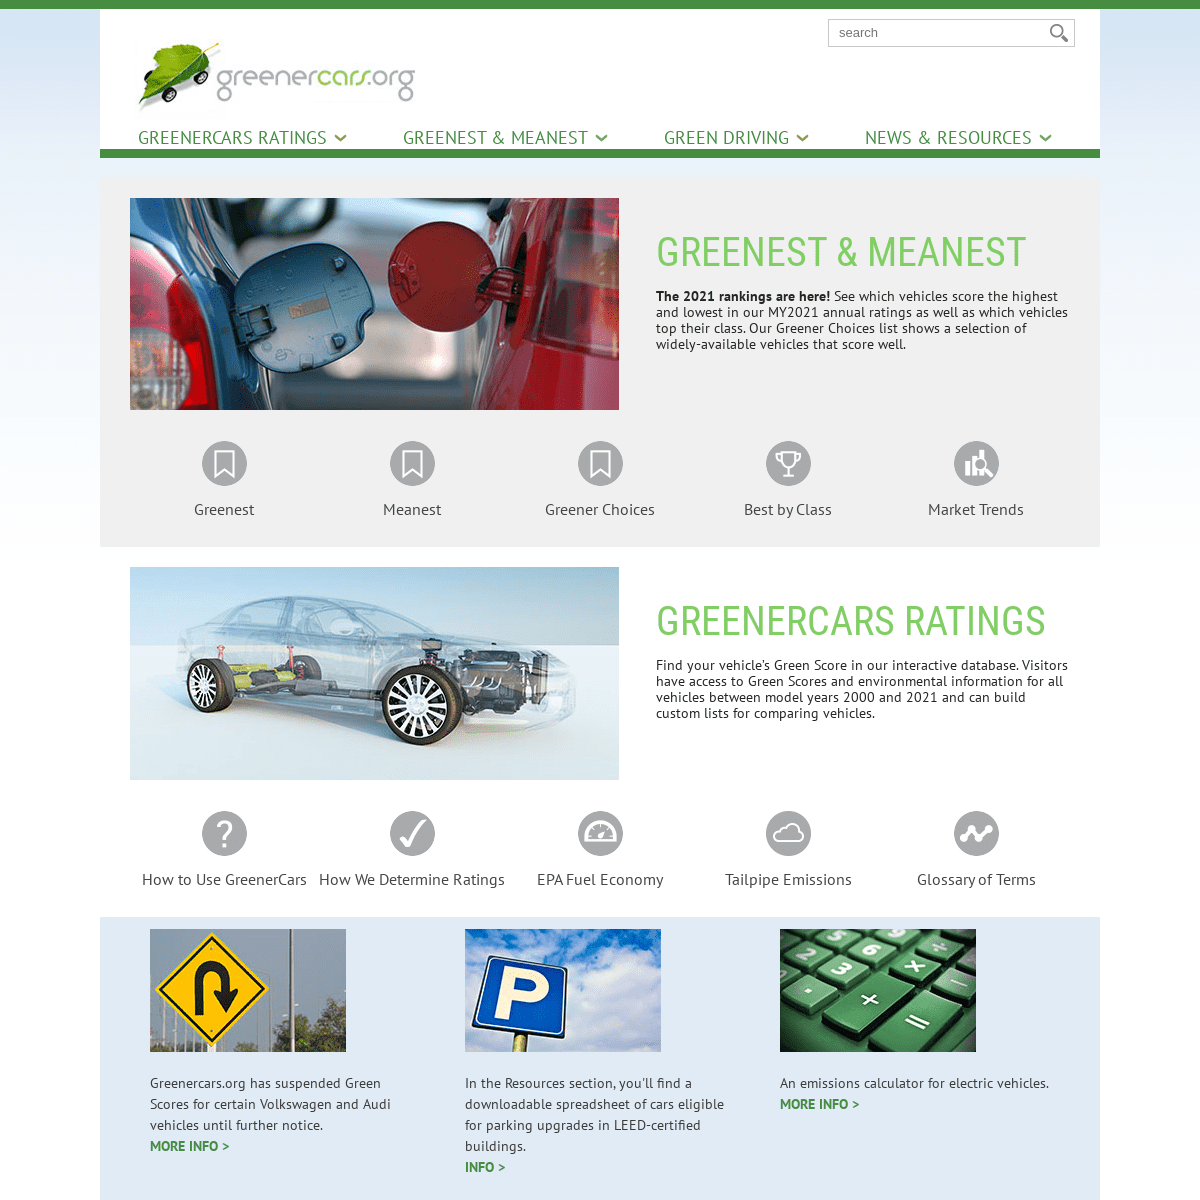 A complete backup of https://greenercars.org